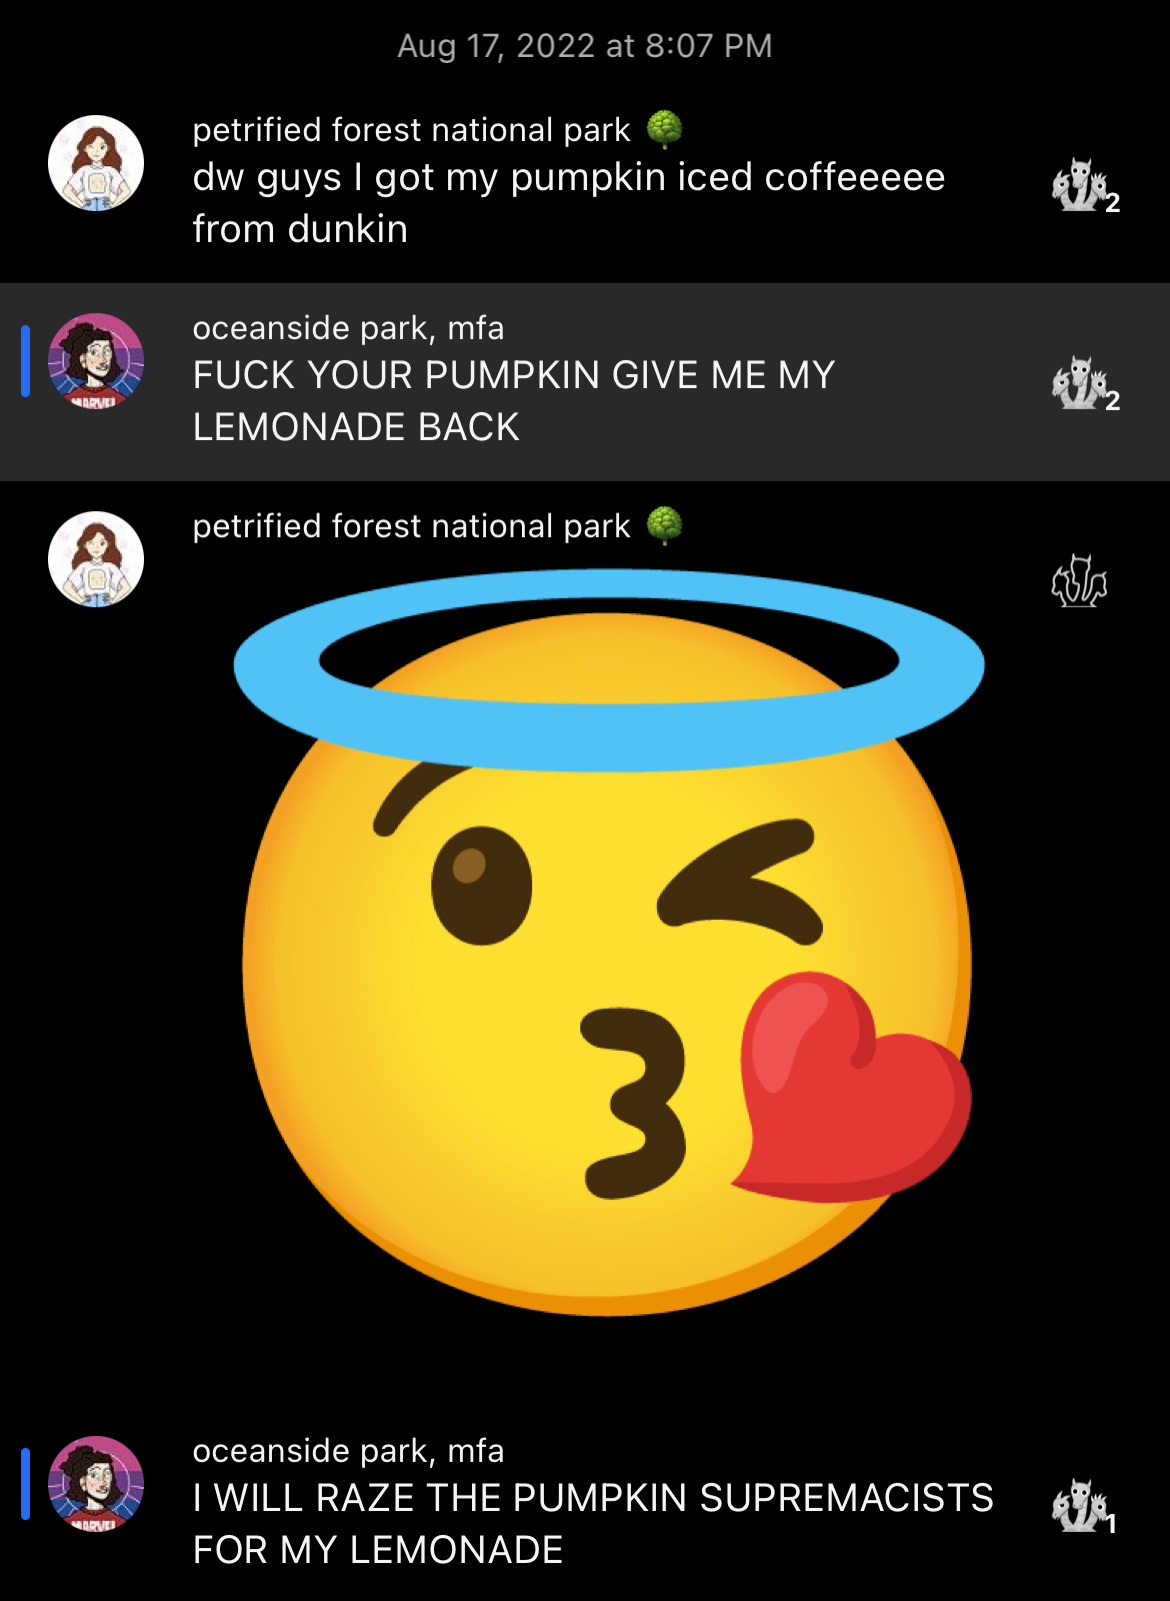 A screenshot of GroupMe in dark mode. Kate is texting about wanting the Dunkin' lemonade back in all caps.